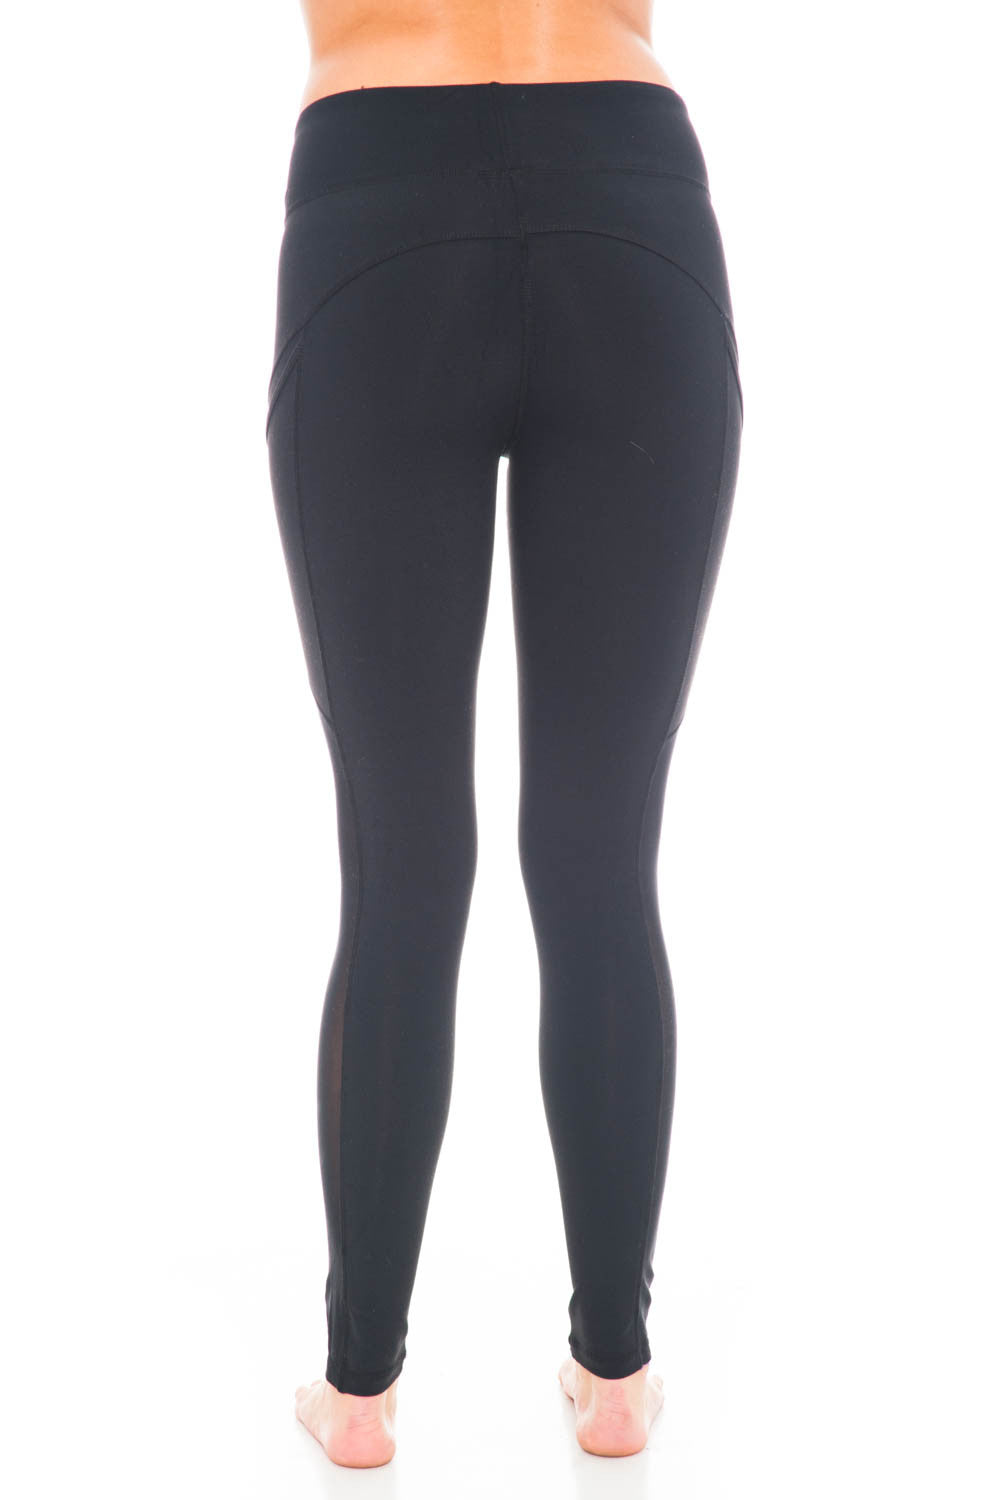 Legging - Side Mesh by Motion by Coalition